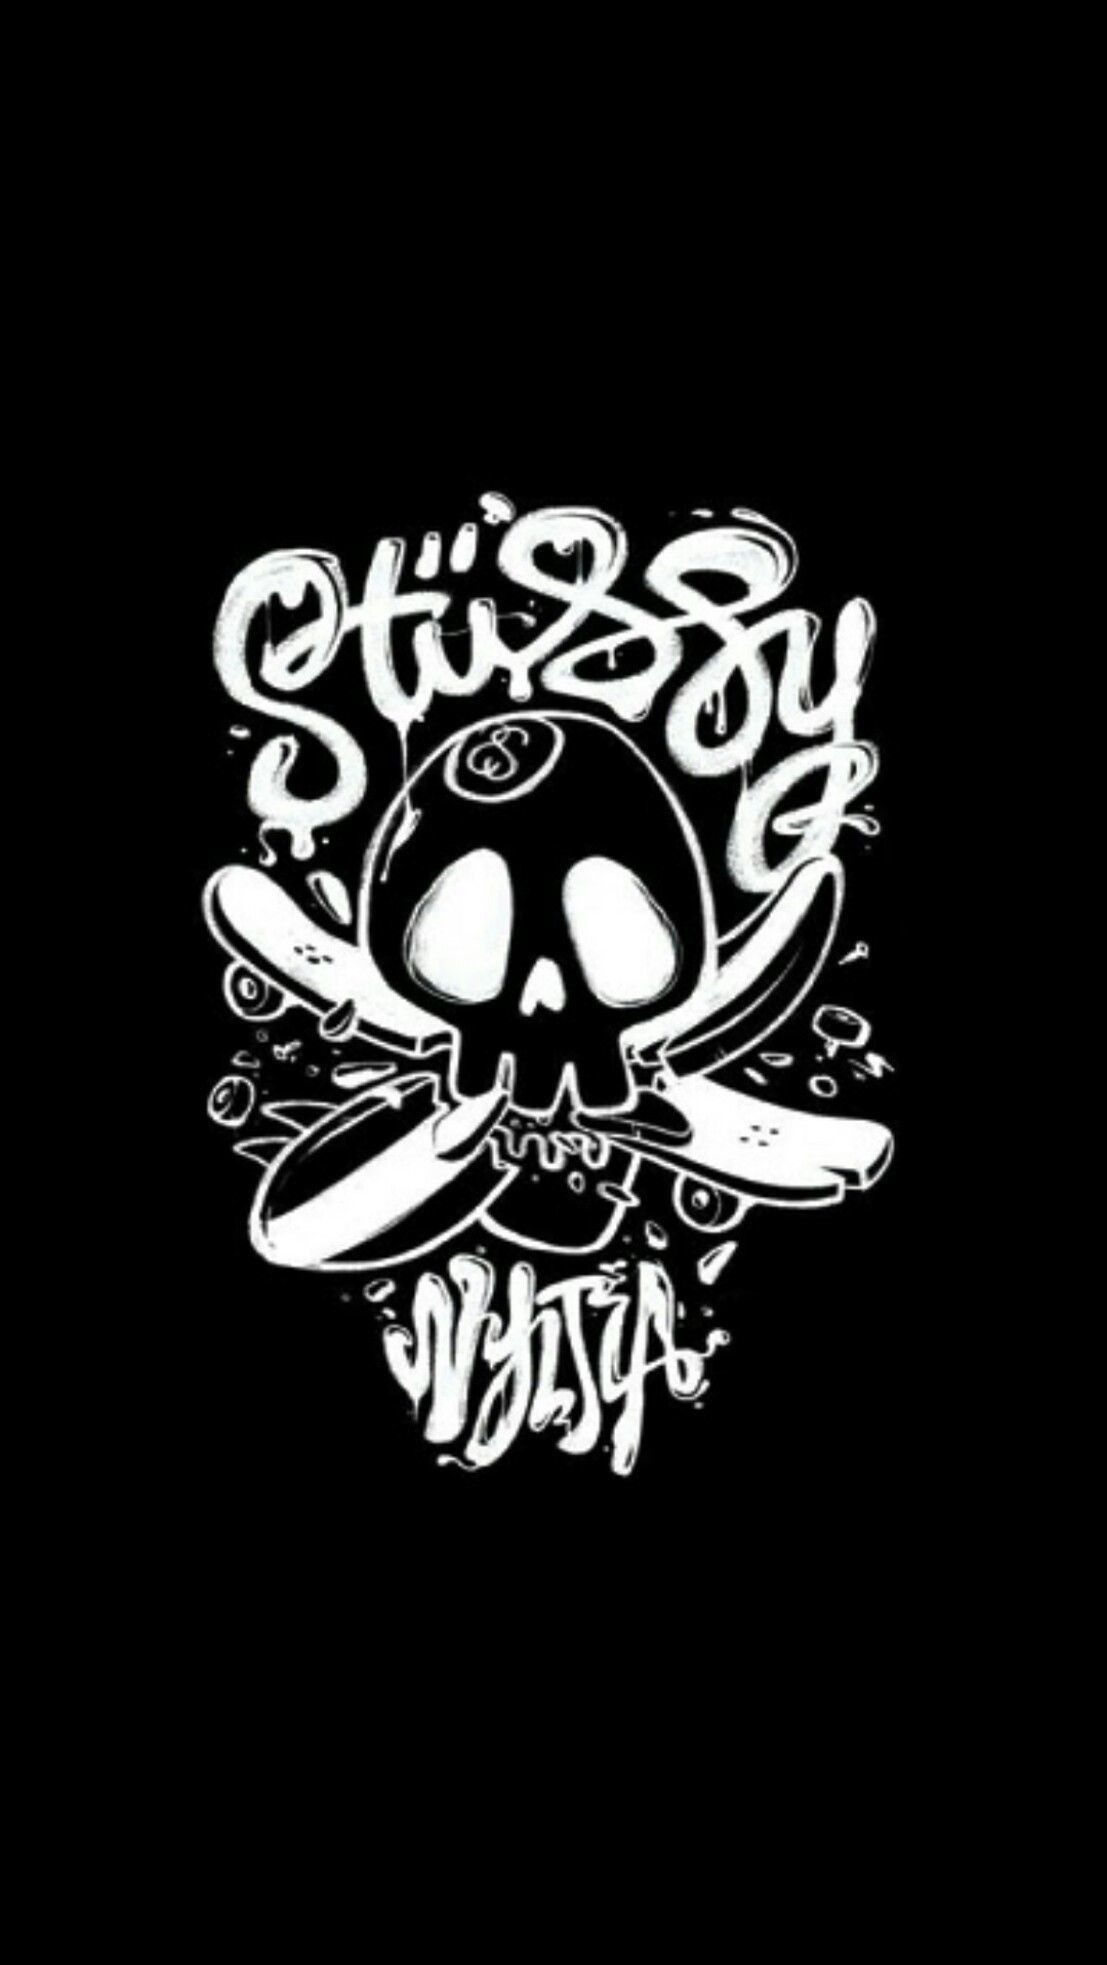 A skull and crossbones logo with the words stabby - Vans